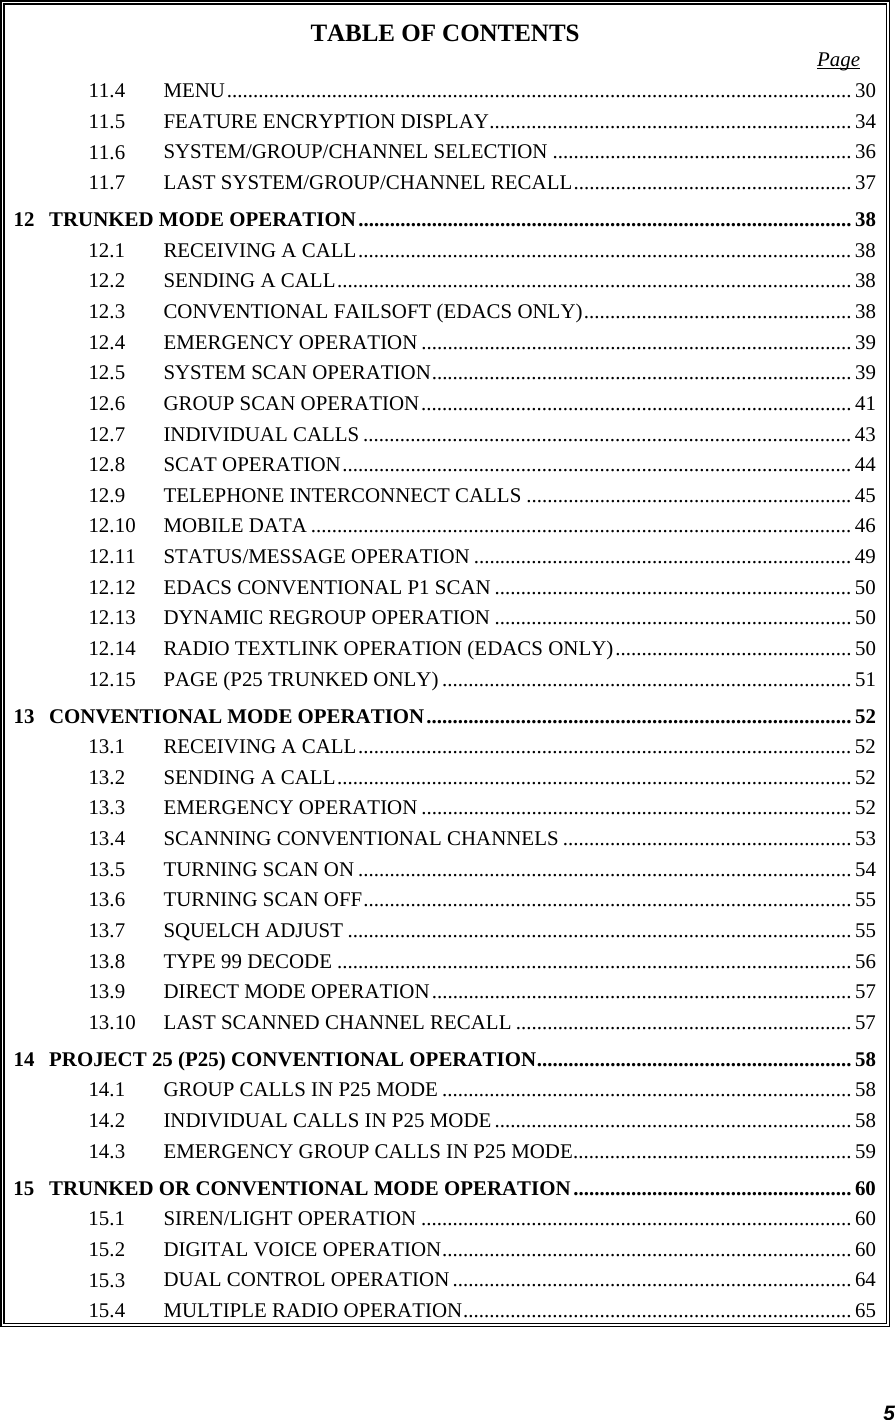 5 TABLE OF CONTENTS  Page 11.4 MENU....................................................................................................................... 3011.5 FEATURE ENCRYPTION DISPLAY..................................................................... 3411.6 SYSTEM/GROUP/CHANNEL SELECTION ......................................................... 3611.7 LAST SYSTEM/GROUP/CHANNEL RECALL.....................................................3712 TRUNKED MODE OPERATION.............................................................................................. 3812.1 RECEIVING A CALL.............................................................................................. 3812.2 SENDING A CALL.................................................................................................. 3812.3 CONVENTIONAL FAILSOFT (EDACS ONLY)................................................... 3812.4 EMERGENCY OPERATION .................................................................................. 3912.5 SYSTEM SCAN OPERATION................................................................................ 3912.6 GROUP SCAN OPERATION.................................................................................. 4112.7 INDIVIDUAL CALLS ............................................................................................. 4312.8 SCAT OPERATION................................................................................................. 4412.9 TELEPHONE INTERCONNECT CALLS ..............................................................4512.10 MOBILE DATA ....................................................................................................... 4612.11 STATUS/MESSAGE OPERATION ........................................................................ 4912.12 EDACS CONVENTIONAL P1 SCAN .................................................................... 5012.13 DYNAMIC REGROUP OPERATION .................................................................... 5012.14 RADIO TEXTLINK OPERATION (EDACS ONLY)............................................. 5012.15 PAGE (P25 TRUNKED ONLY) .............................................................................. 5113 CONVENTIONAL MODE OPERATION................................................................................. 5213.1 RECEIVING A CALL.............................................................................................. 5213.2 SENDING A CALL.................................................................................................. 5213.3 EMERGENCY OPERATION .................................................................................. 5213.4 SCANNING CONVENTIONAL CHANNELS ....................................................... 5313.5 TURNING SCAN ON .............................................................................................. 5413.6 TURNING SCAN OFF............................................................................................. 5513.7 SQUELCH ADJUST ................................................................................................5513.8 TYPE 99 DECODE ..................................................................................................5613.9 DIRECT MODE OPERATION................................................................................ 5713.10 LAST SCANNED CHANNEL RECALL ................................................................ 5714 PROJECT 25 (P25) CONVENTIONAL OPERATION............................................................ 5814.1 GROUP CALLS IN P25 MODE .............................................................................. 5814.2 INDIVIDUAL CALLS IN P25 MODE.................................................................... 5814.3 EMERGENCY GROUP CALLS IN P25 MODE..................................................... 5915 TRUNKED OR CONVENTIONAL MODE OPERATION.....................................................6015.1 SIREN/LIGHT OPERATION ..................................................................................6015.2 DIGITAL VOICE OPERATION.............................................................................. 6015.3 DUAL CONTROL OPERATION............................................................................ 6415.4 MULTIPLE RADIO OPERATION.......................................................................... 65